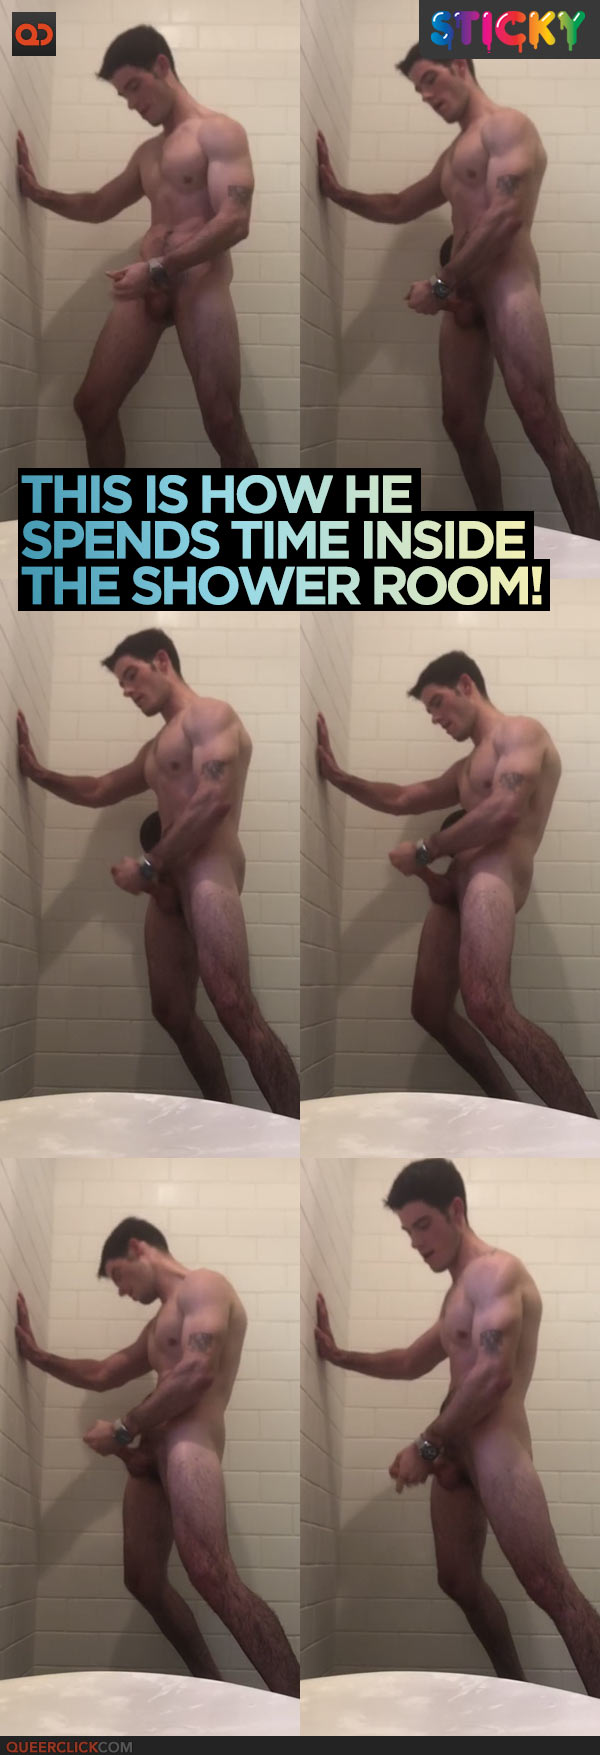 This Is How He Spends Time Inside The Shower Room!